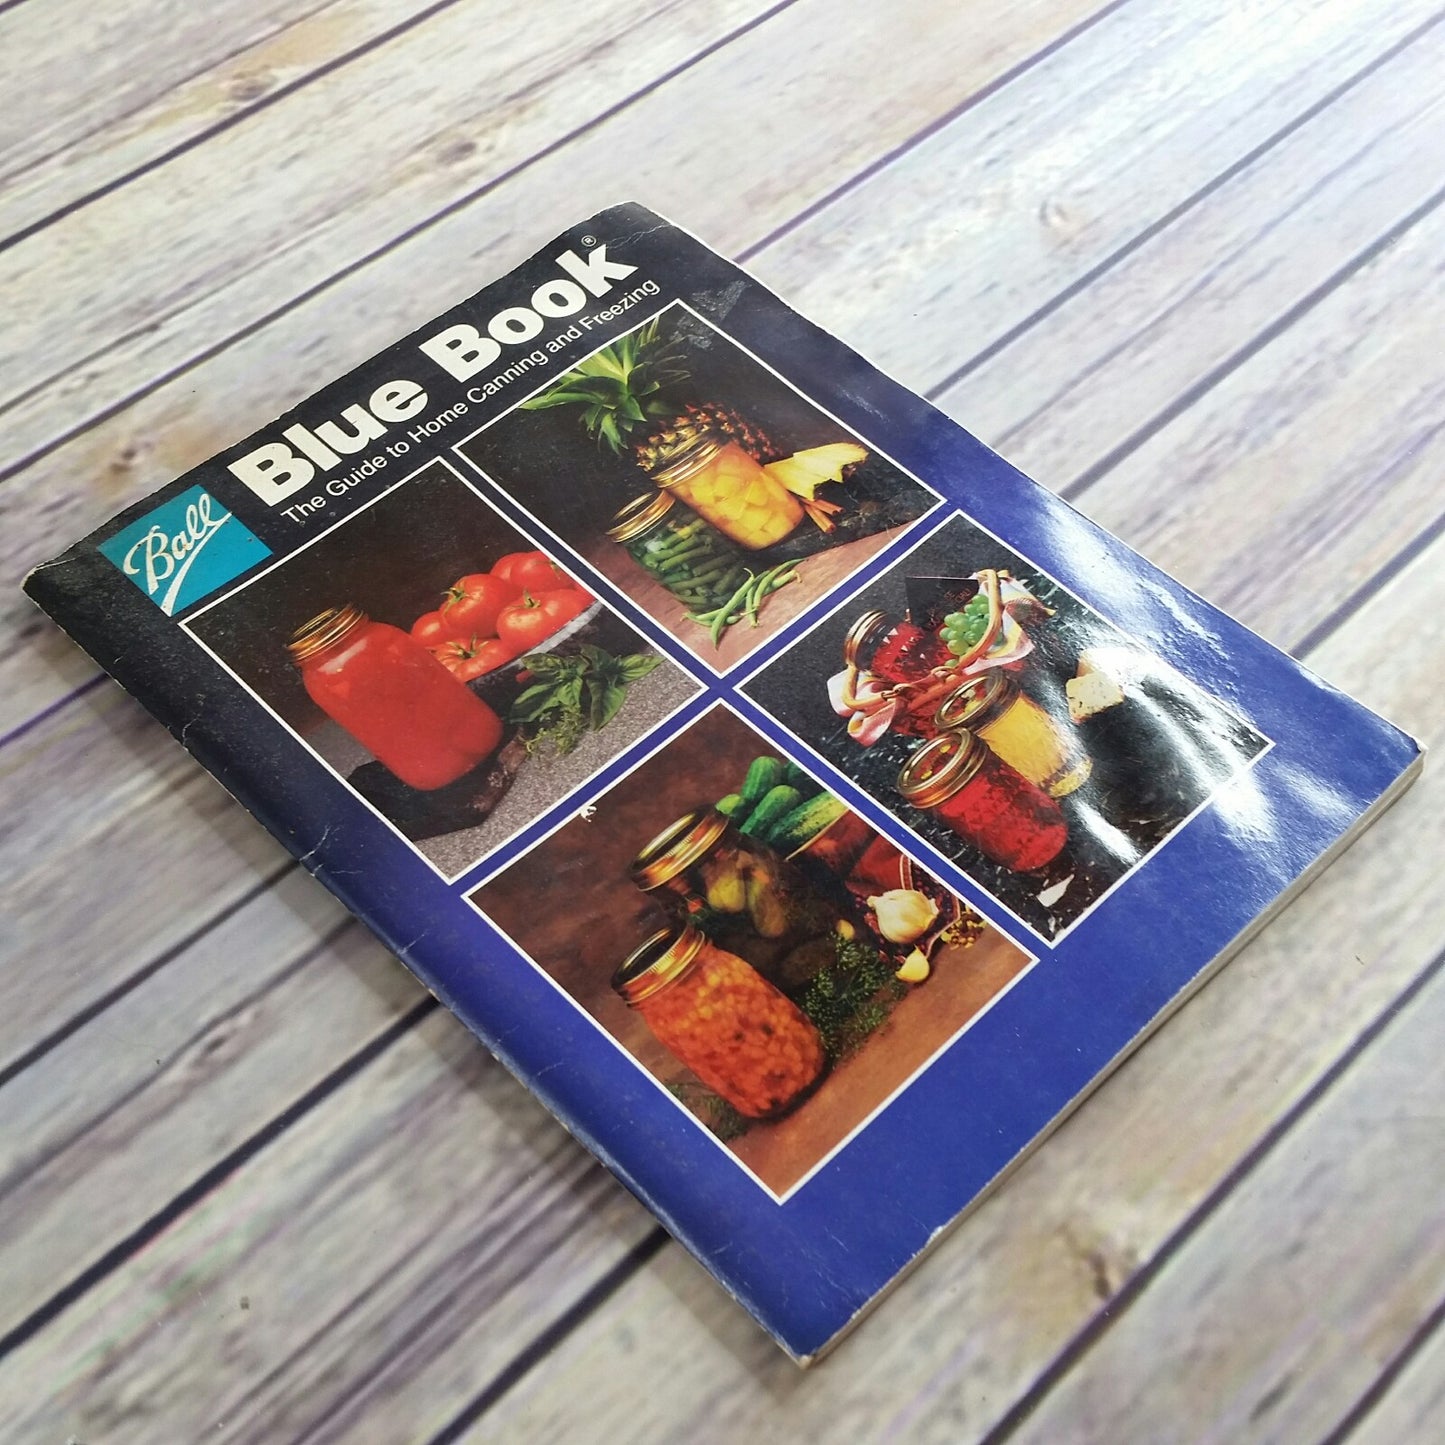 Vintage Cookbook Ball Jar Blue Book Guide to Home Canning and Freezing 1989 Paperback Booklet